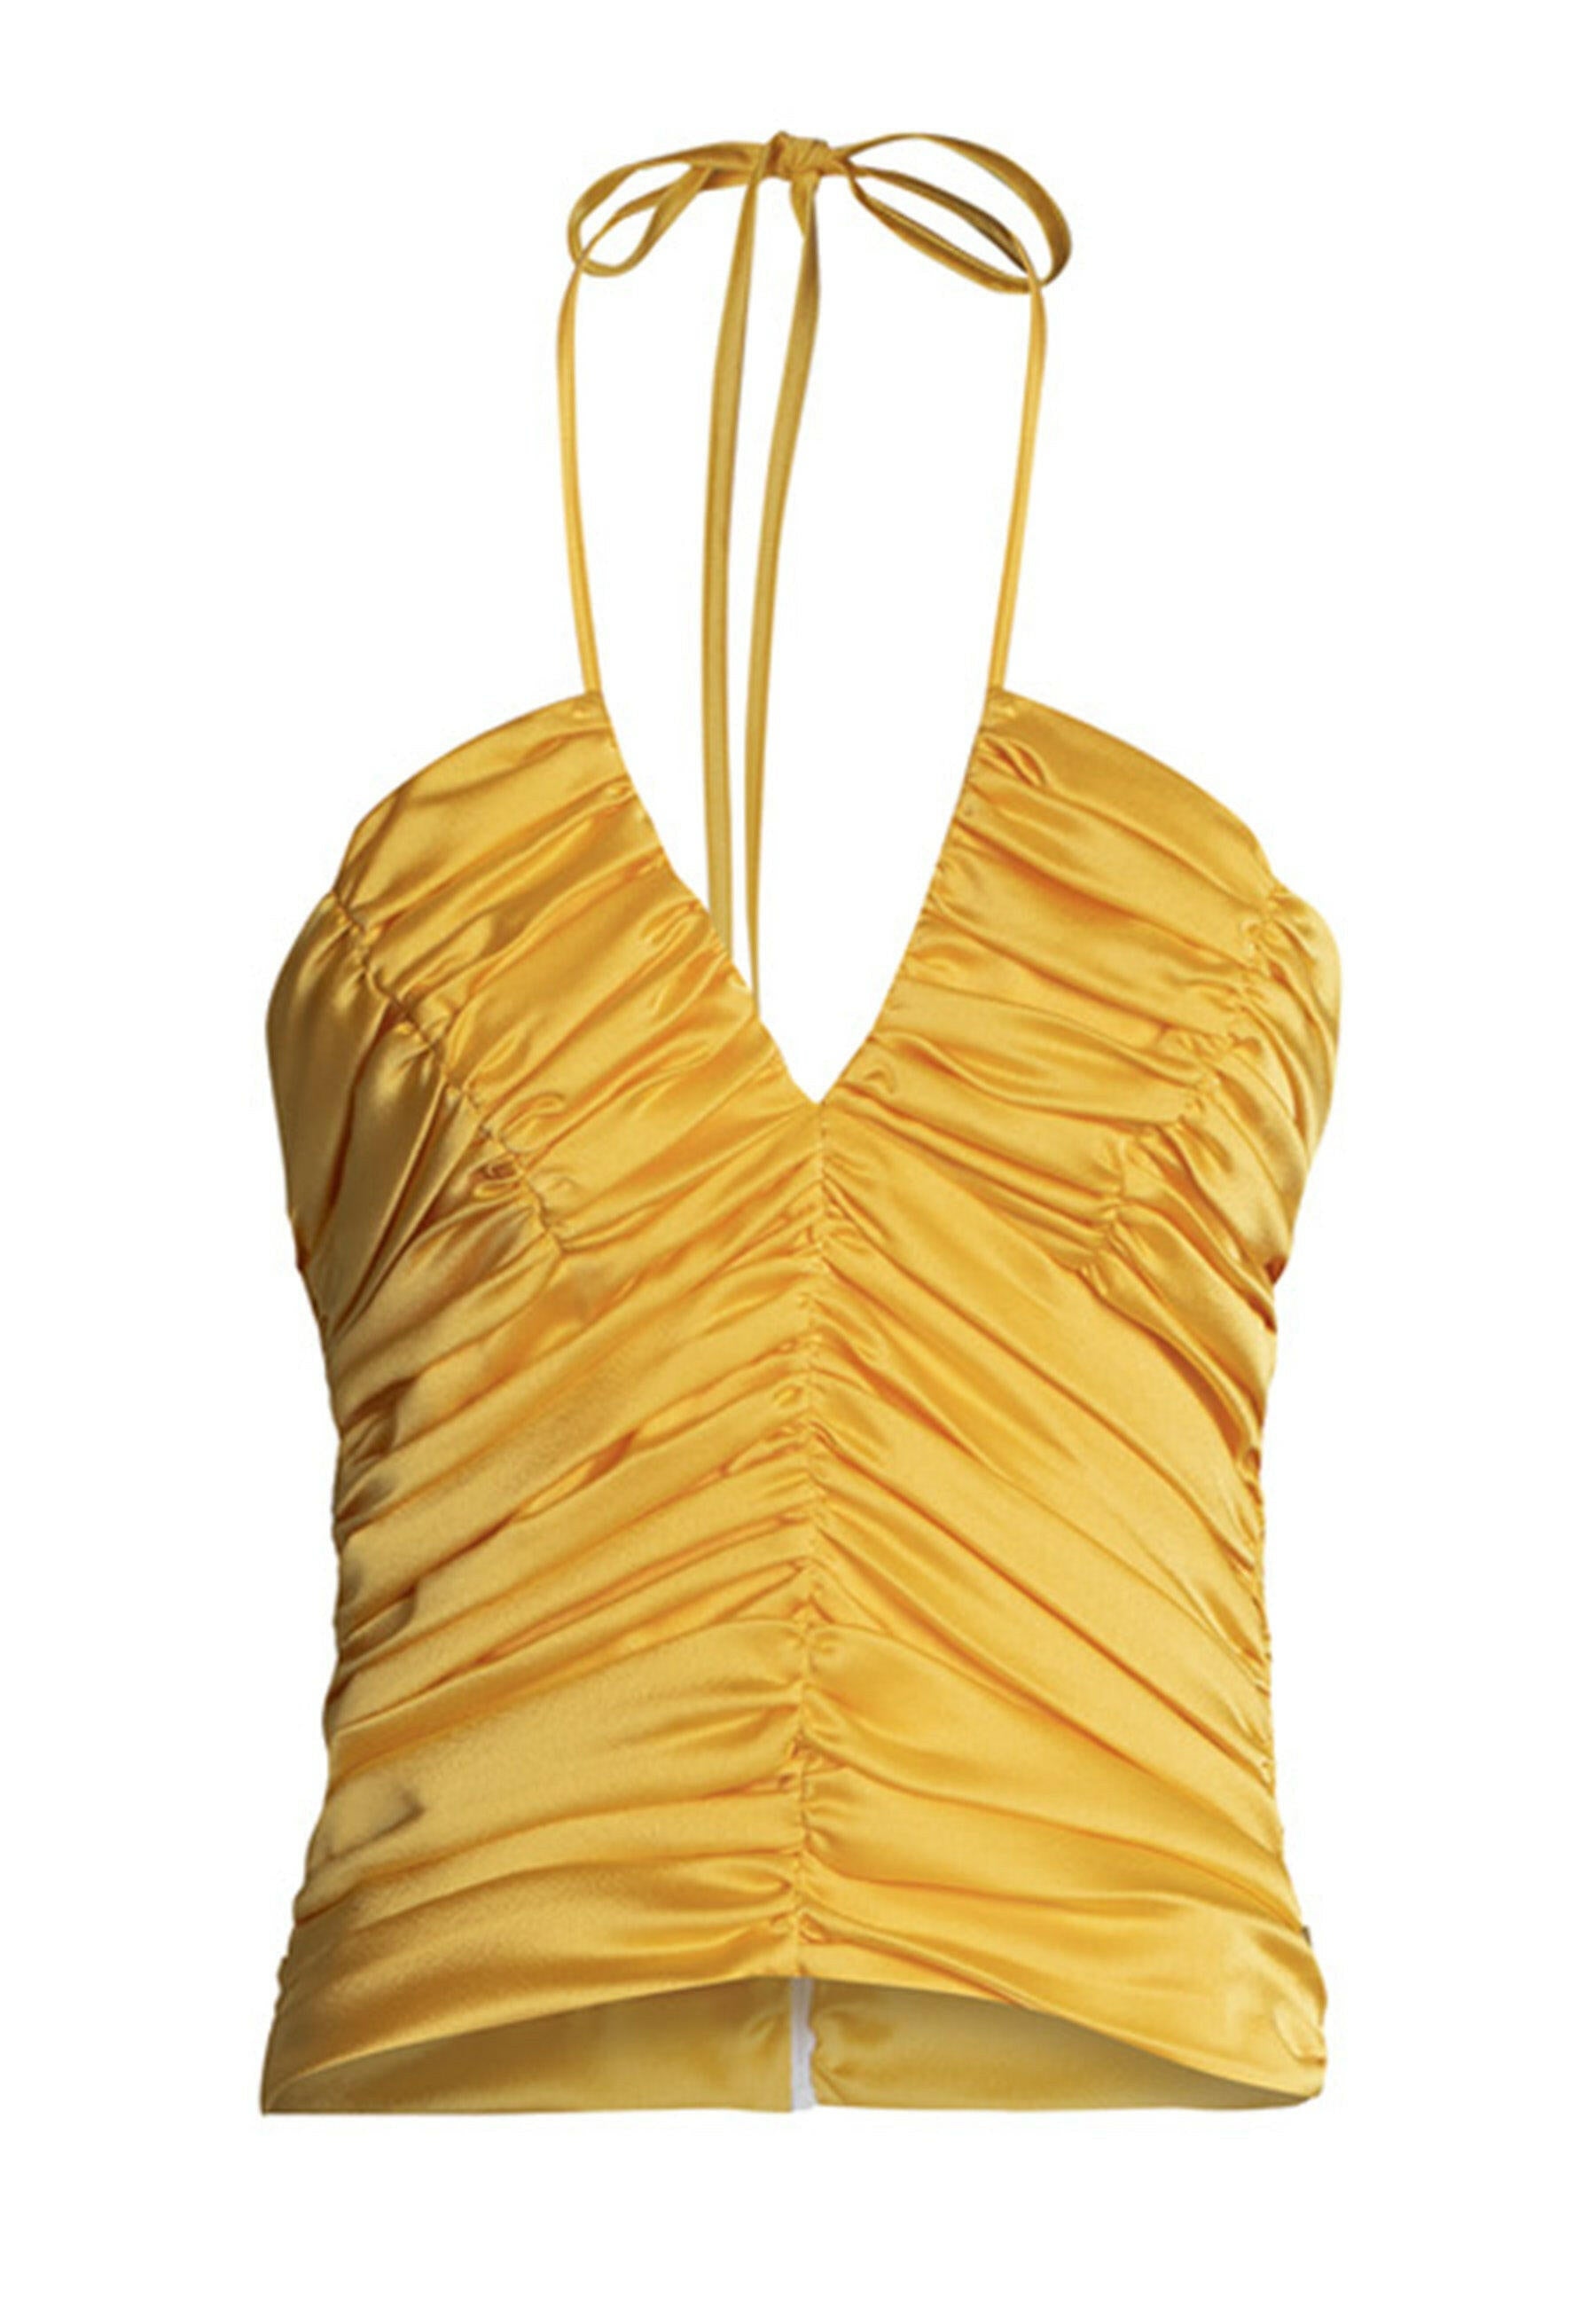 Short women's top in yellow fabric with central draping and V-neck